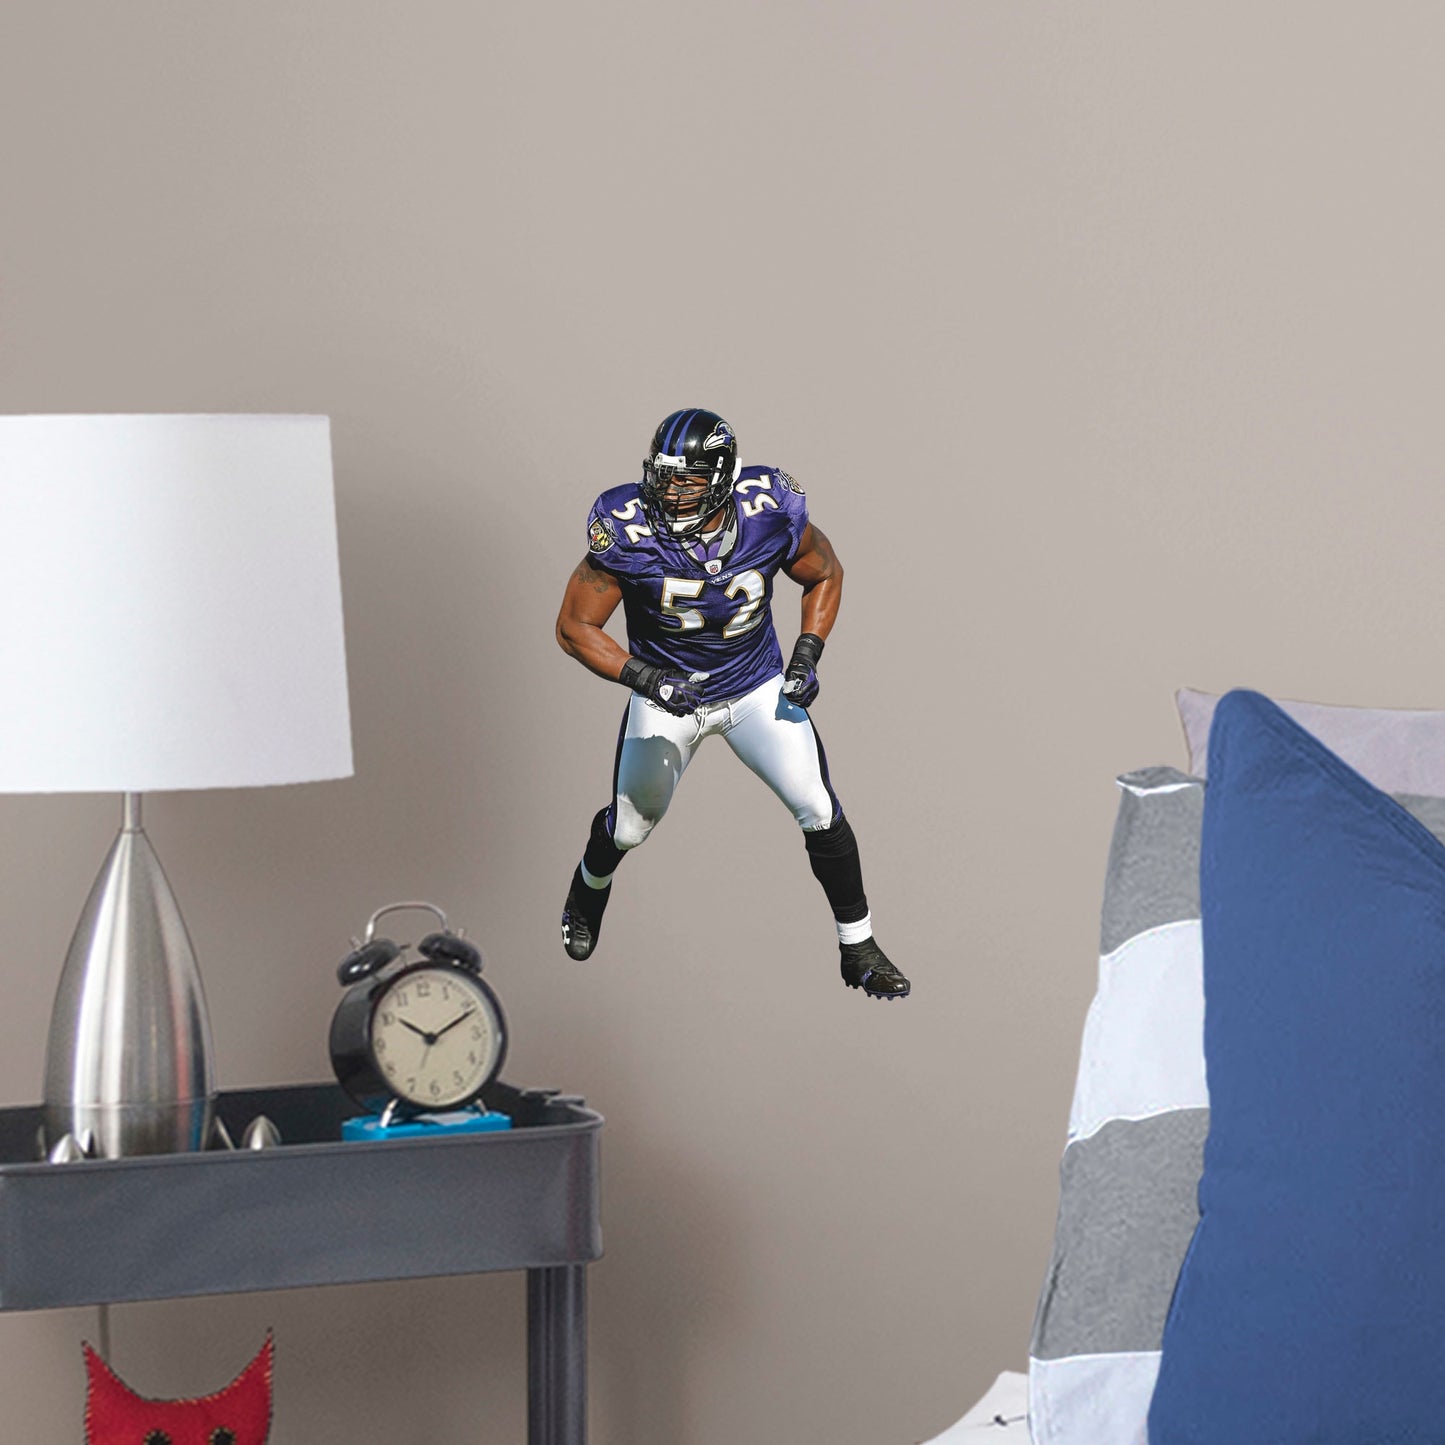 Large Athlete + 2 Decals (10"W x 16"H) He's the second linebacker ever to win the NFL's Super Bowl MVP Award, and now, Brickwall, a.k.a. Ray Lewis, is ready for the bedroom, living room or locker room. This rugged, removable wall decal features the full figure of two-time Super Bowl champion No. 52 in his black, purple and metallic gold Baltimore Ravens best. Go Ravens!